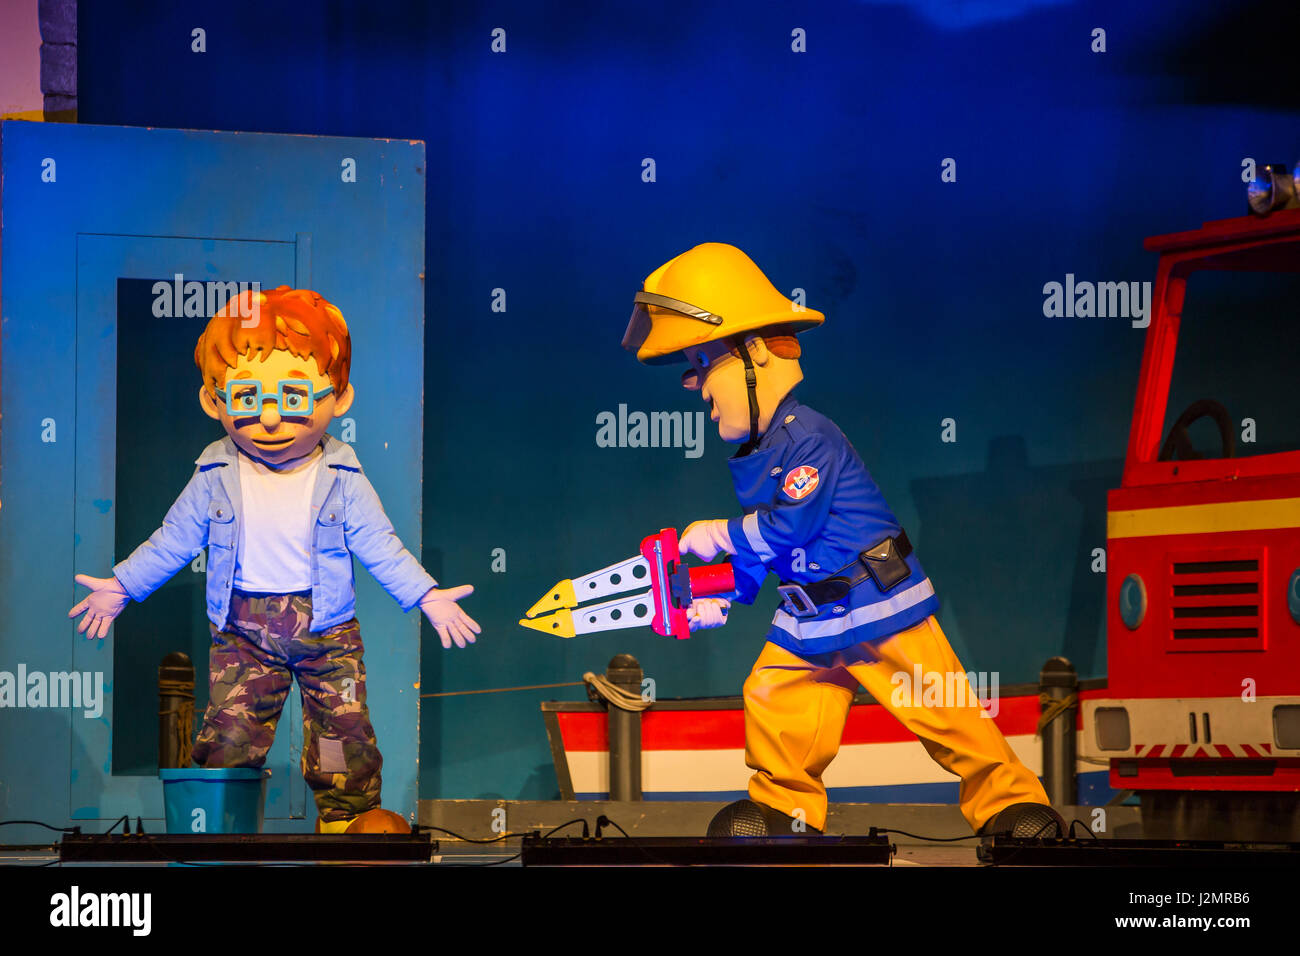 Feuerwehrmann High Resolution Stock Photography and Images - Alamy